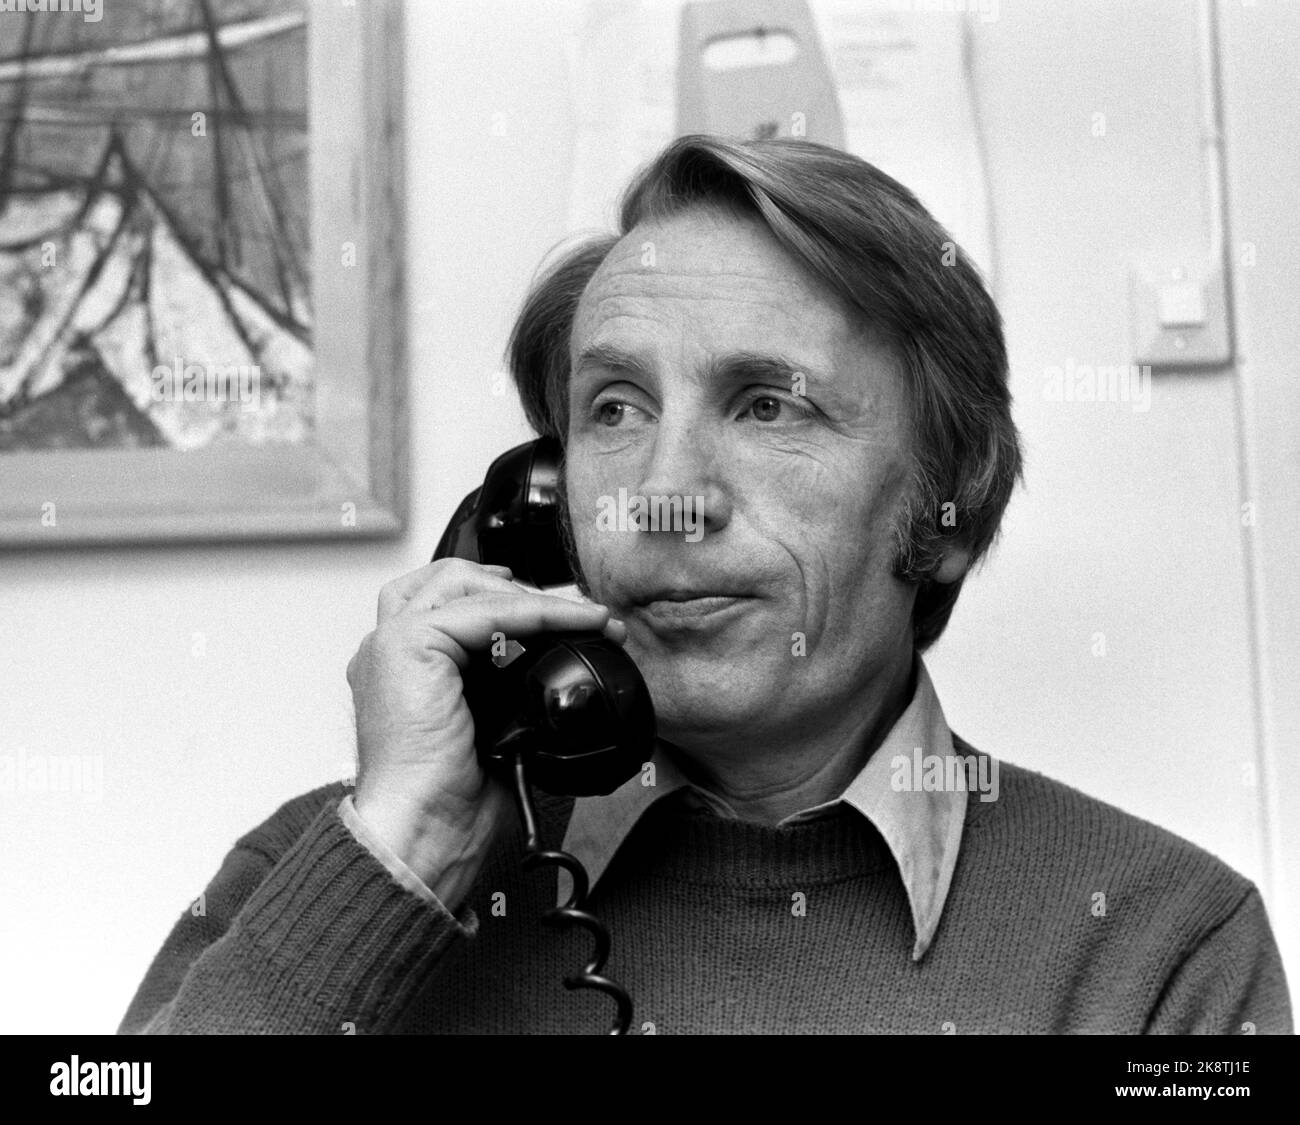 Oslo 197311. Bjørn Sand is the man behind the Kverulant Stutum, who calls Totto Osvold in the radio program Nattata, and has simple solutions to the world's problems. Photo Ivar Aaserud / Current / NTB Stock Photo